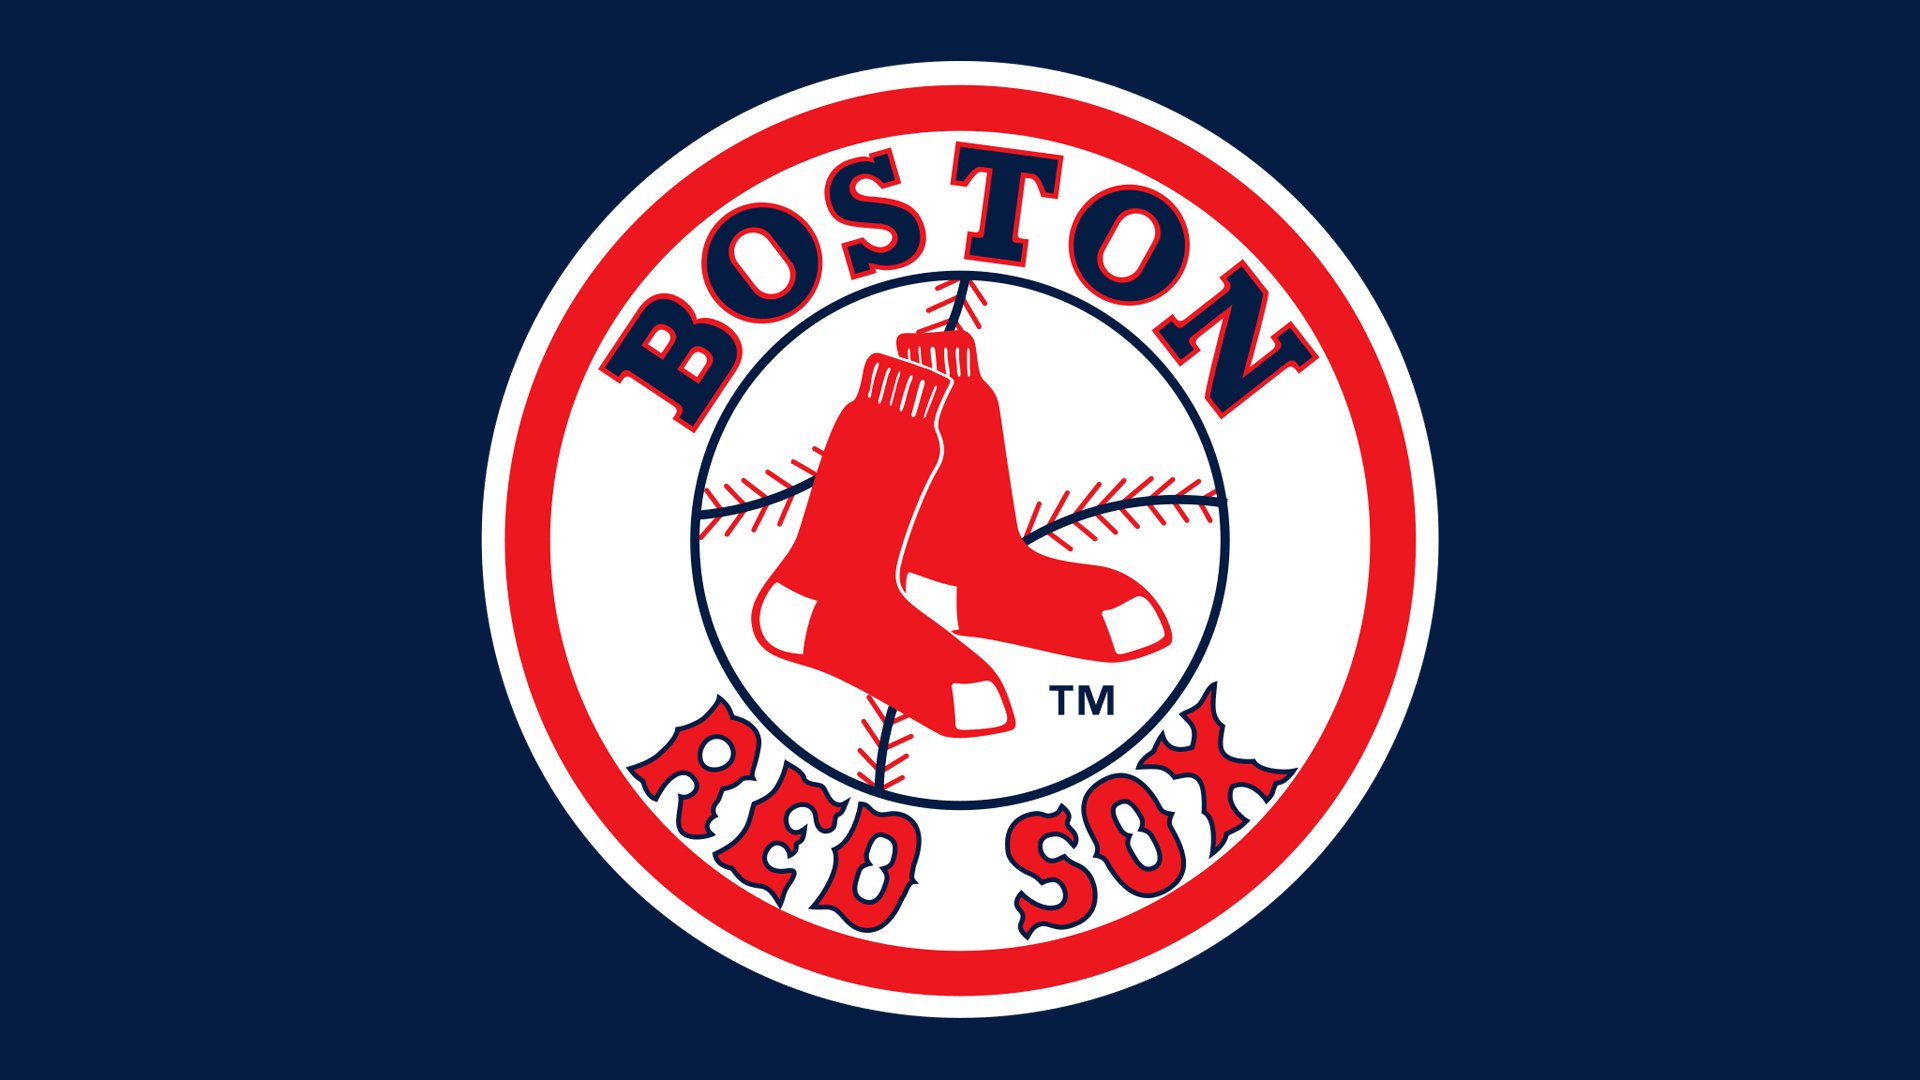 Boston Red Sox team name history